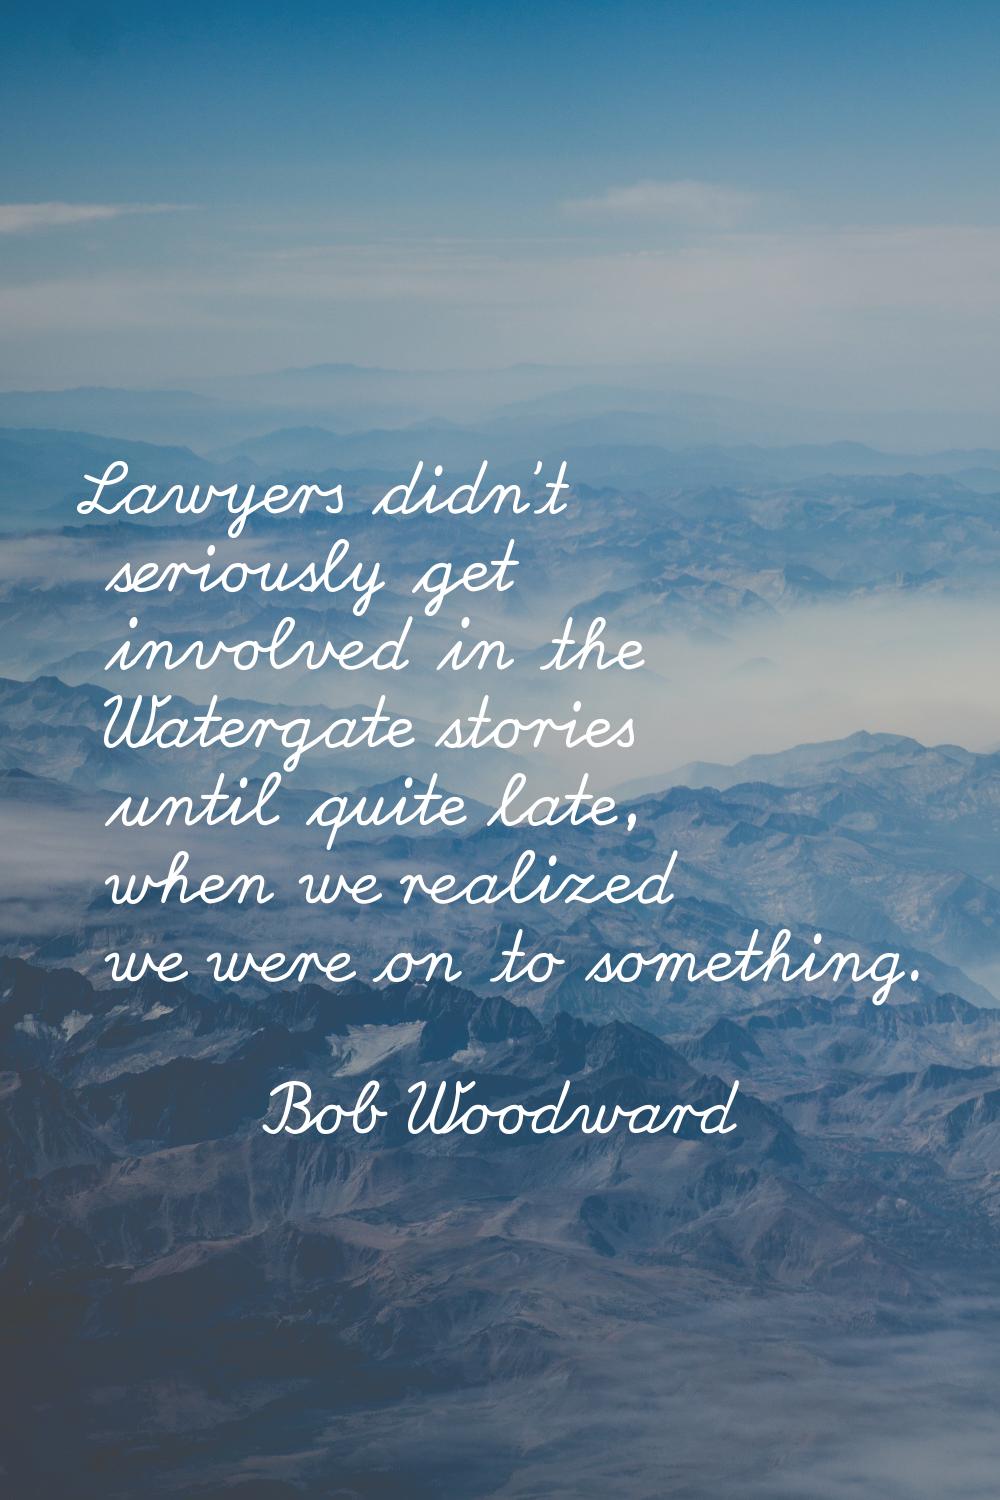 Lawyers didn't seriously get involved in the Watergate stories until quite late, when we realized w